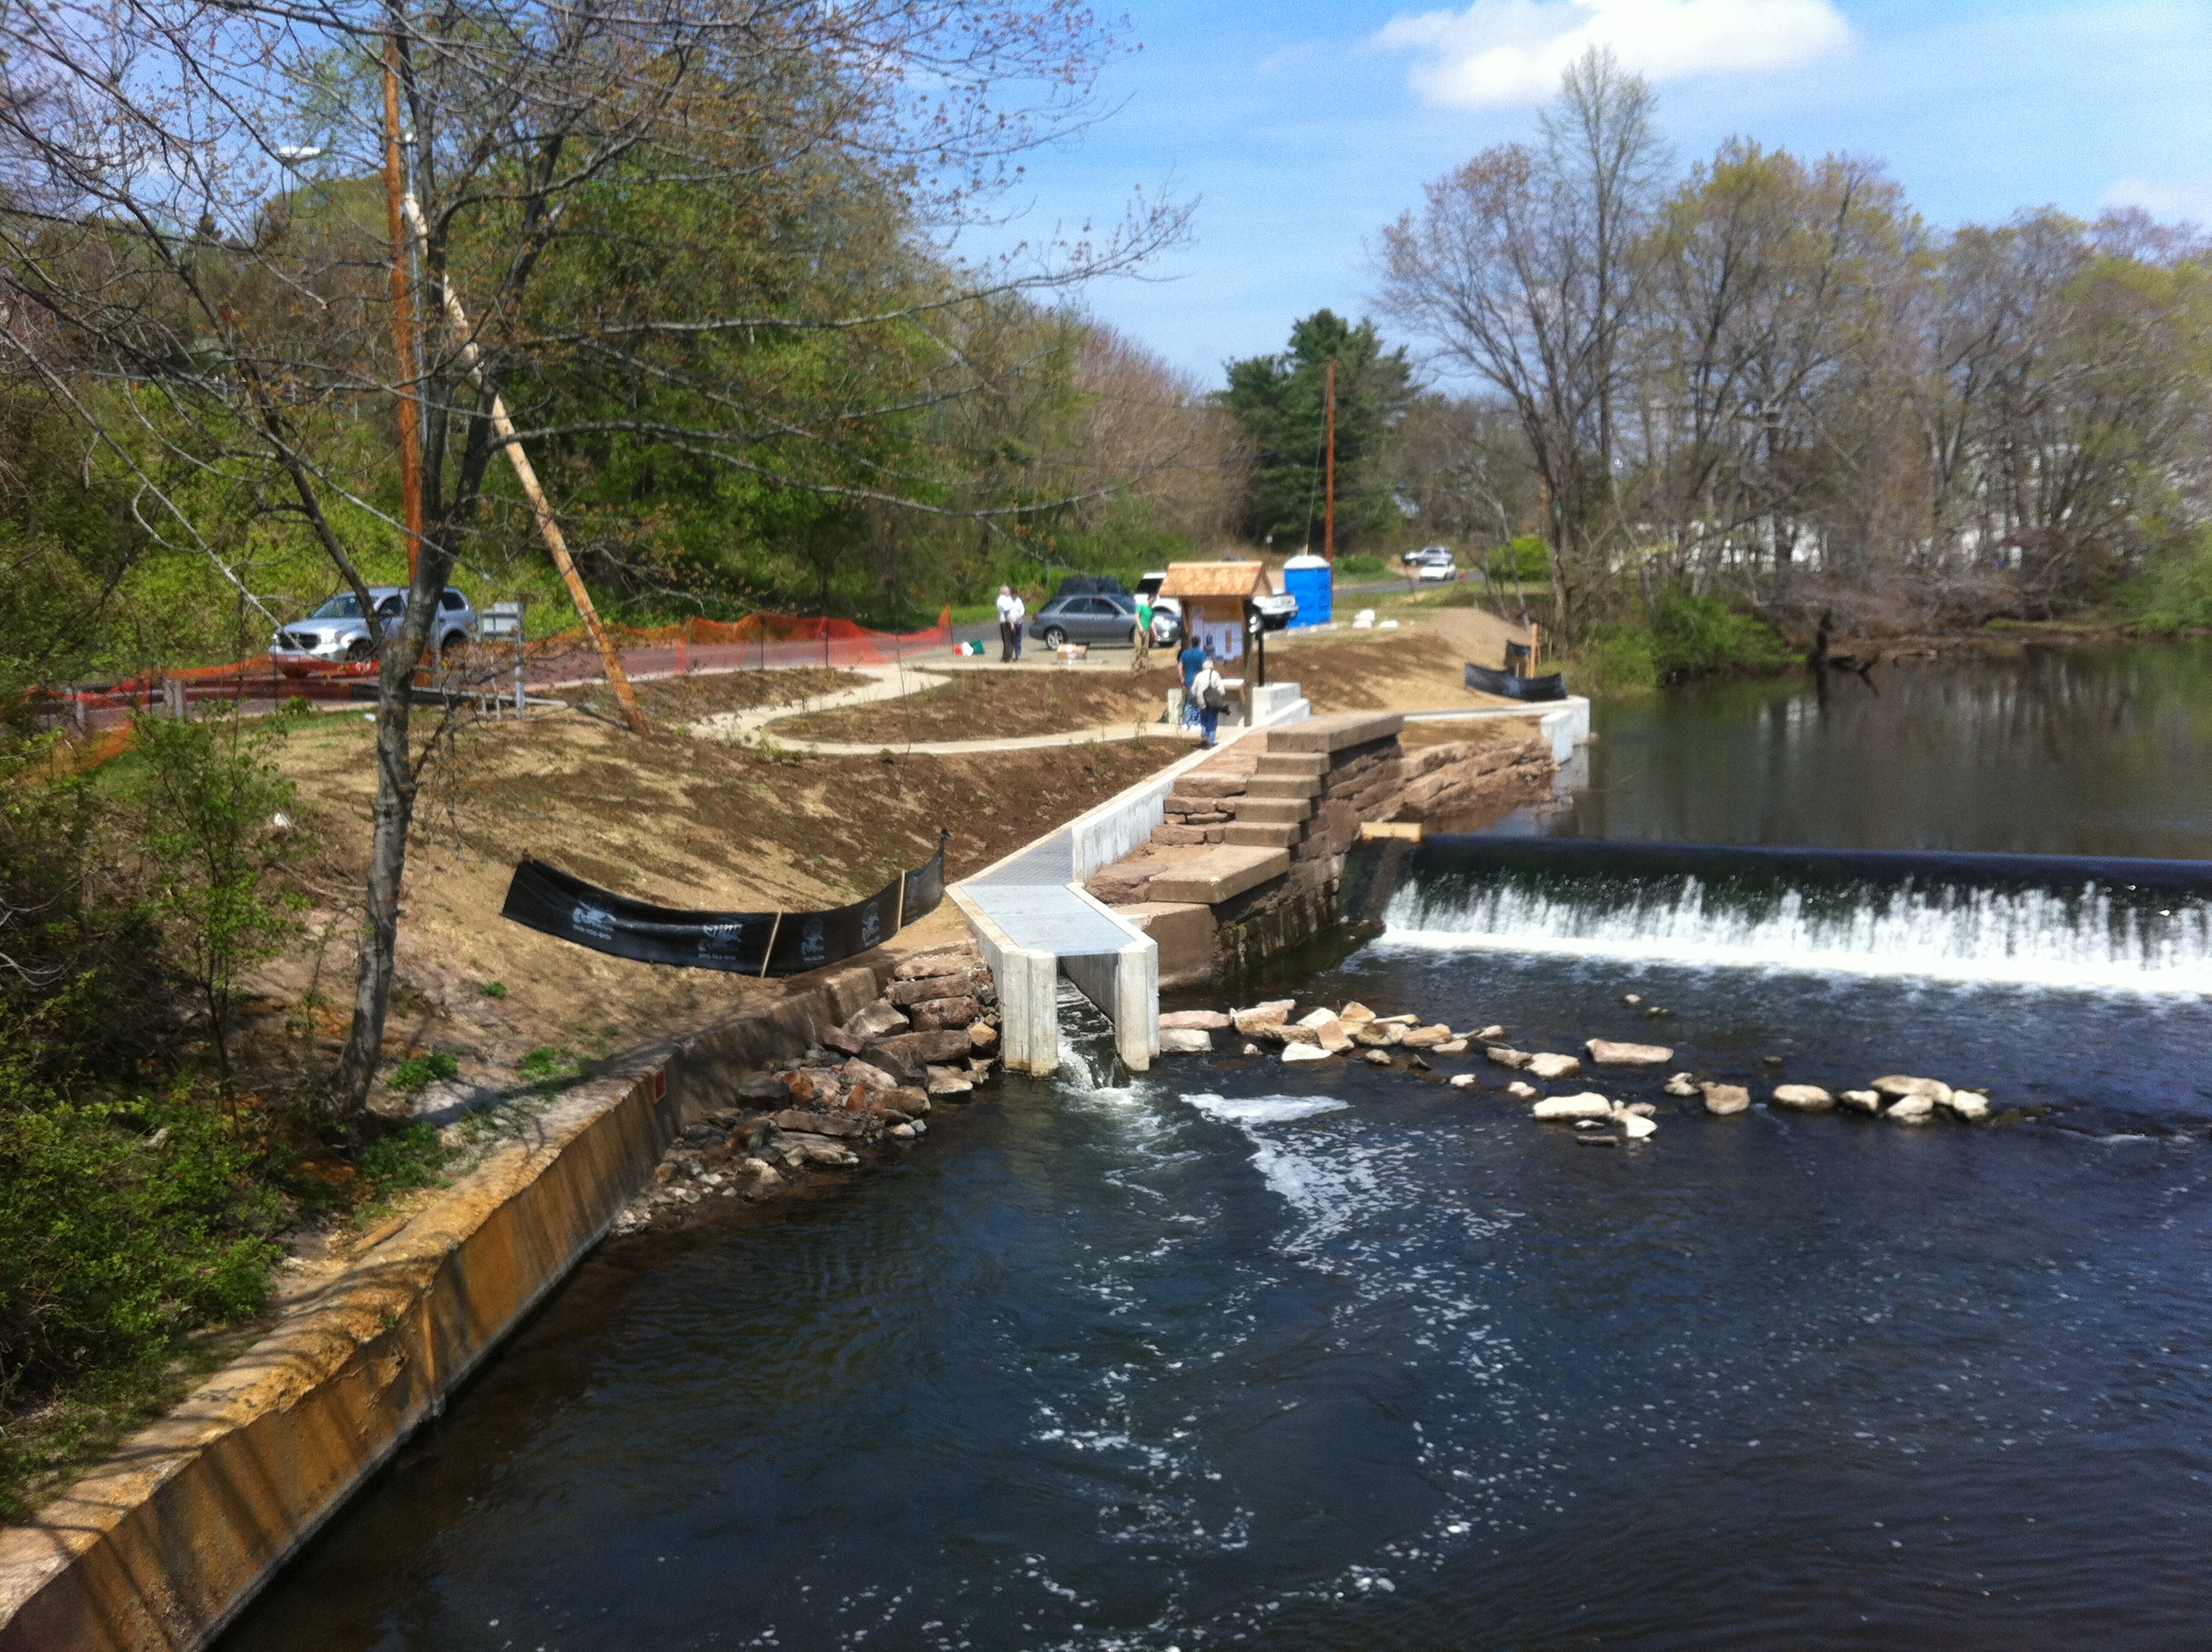 View of the new fishway at Wallace DamPhoto credit: Leah Schmalz